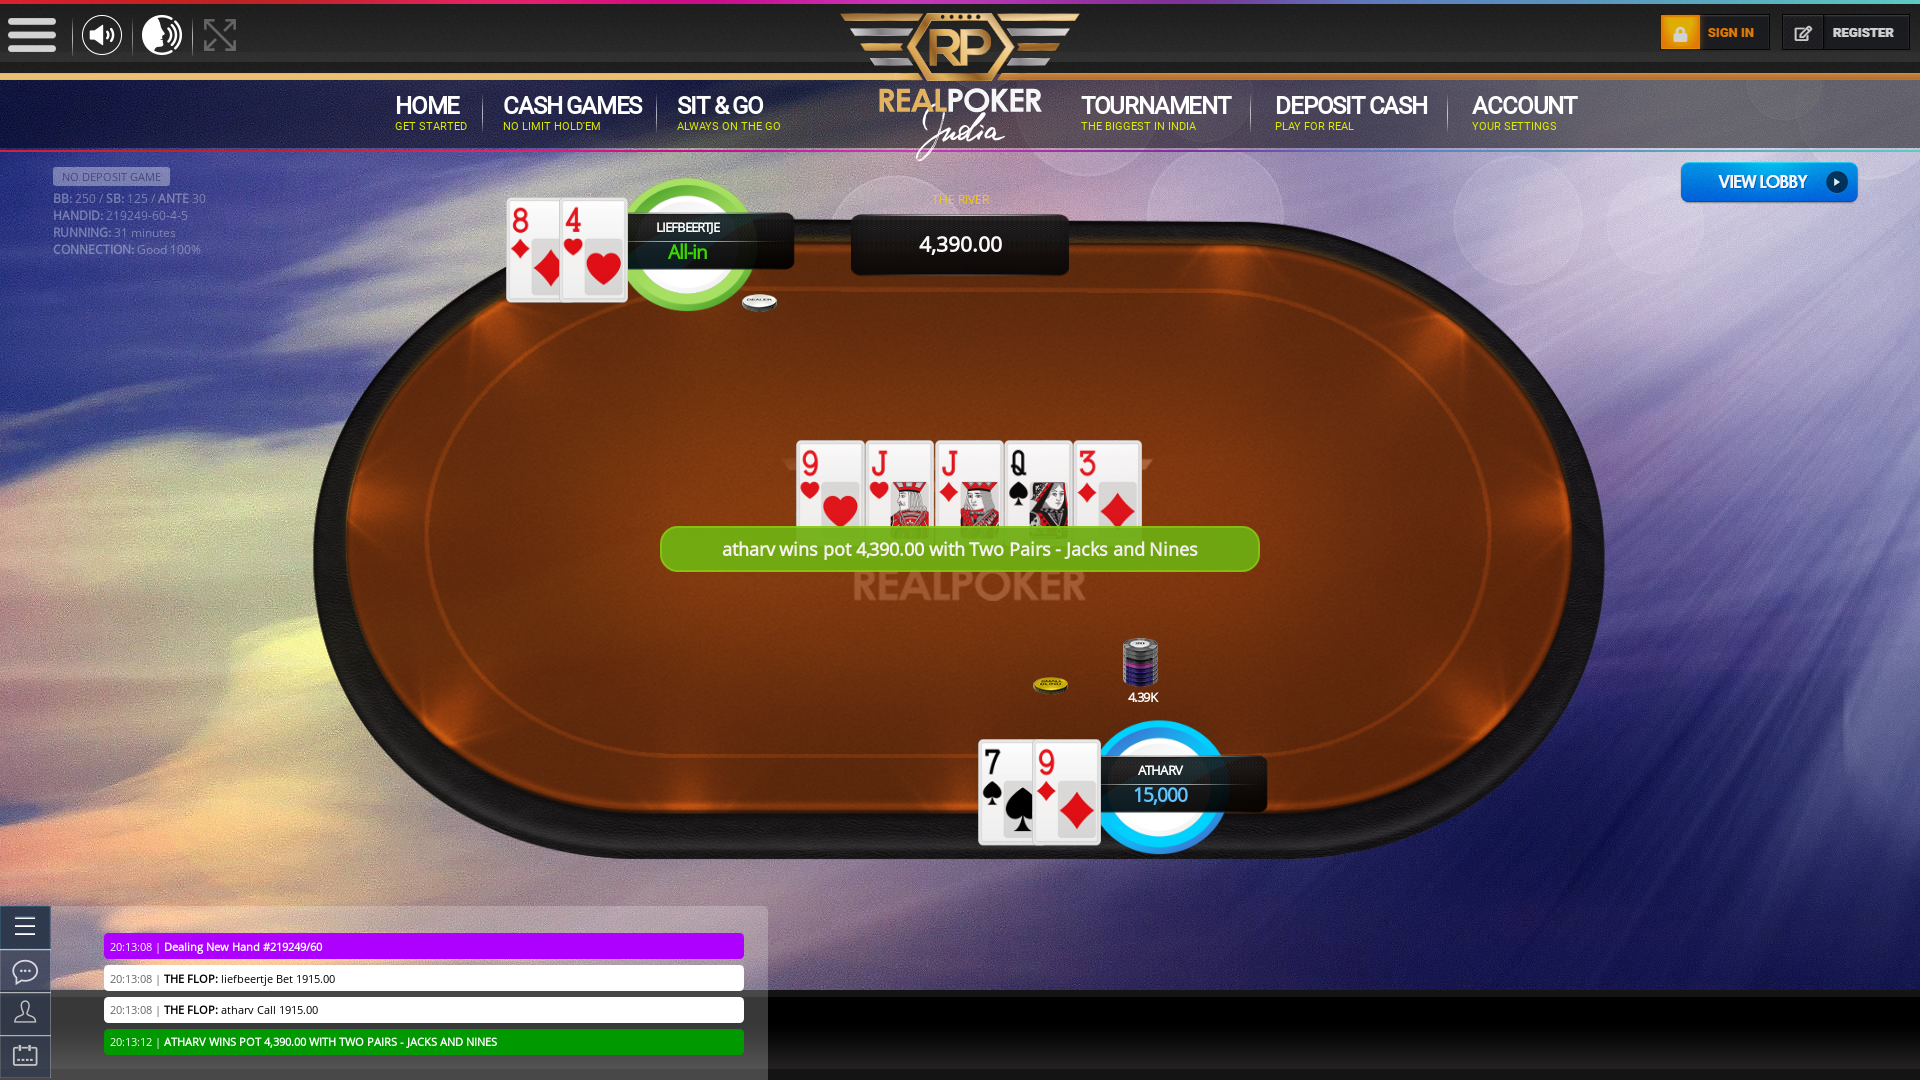 Real poker 10 player table in the 3 match